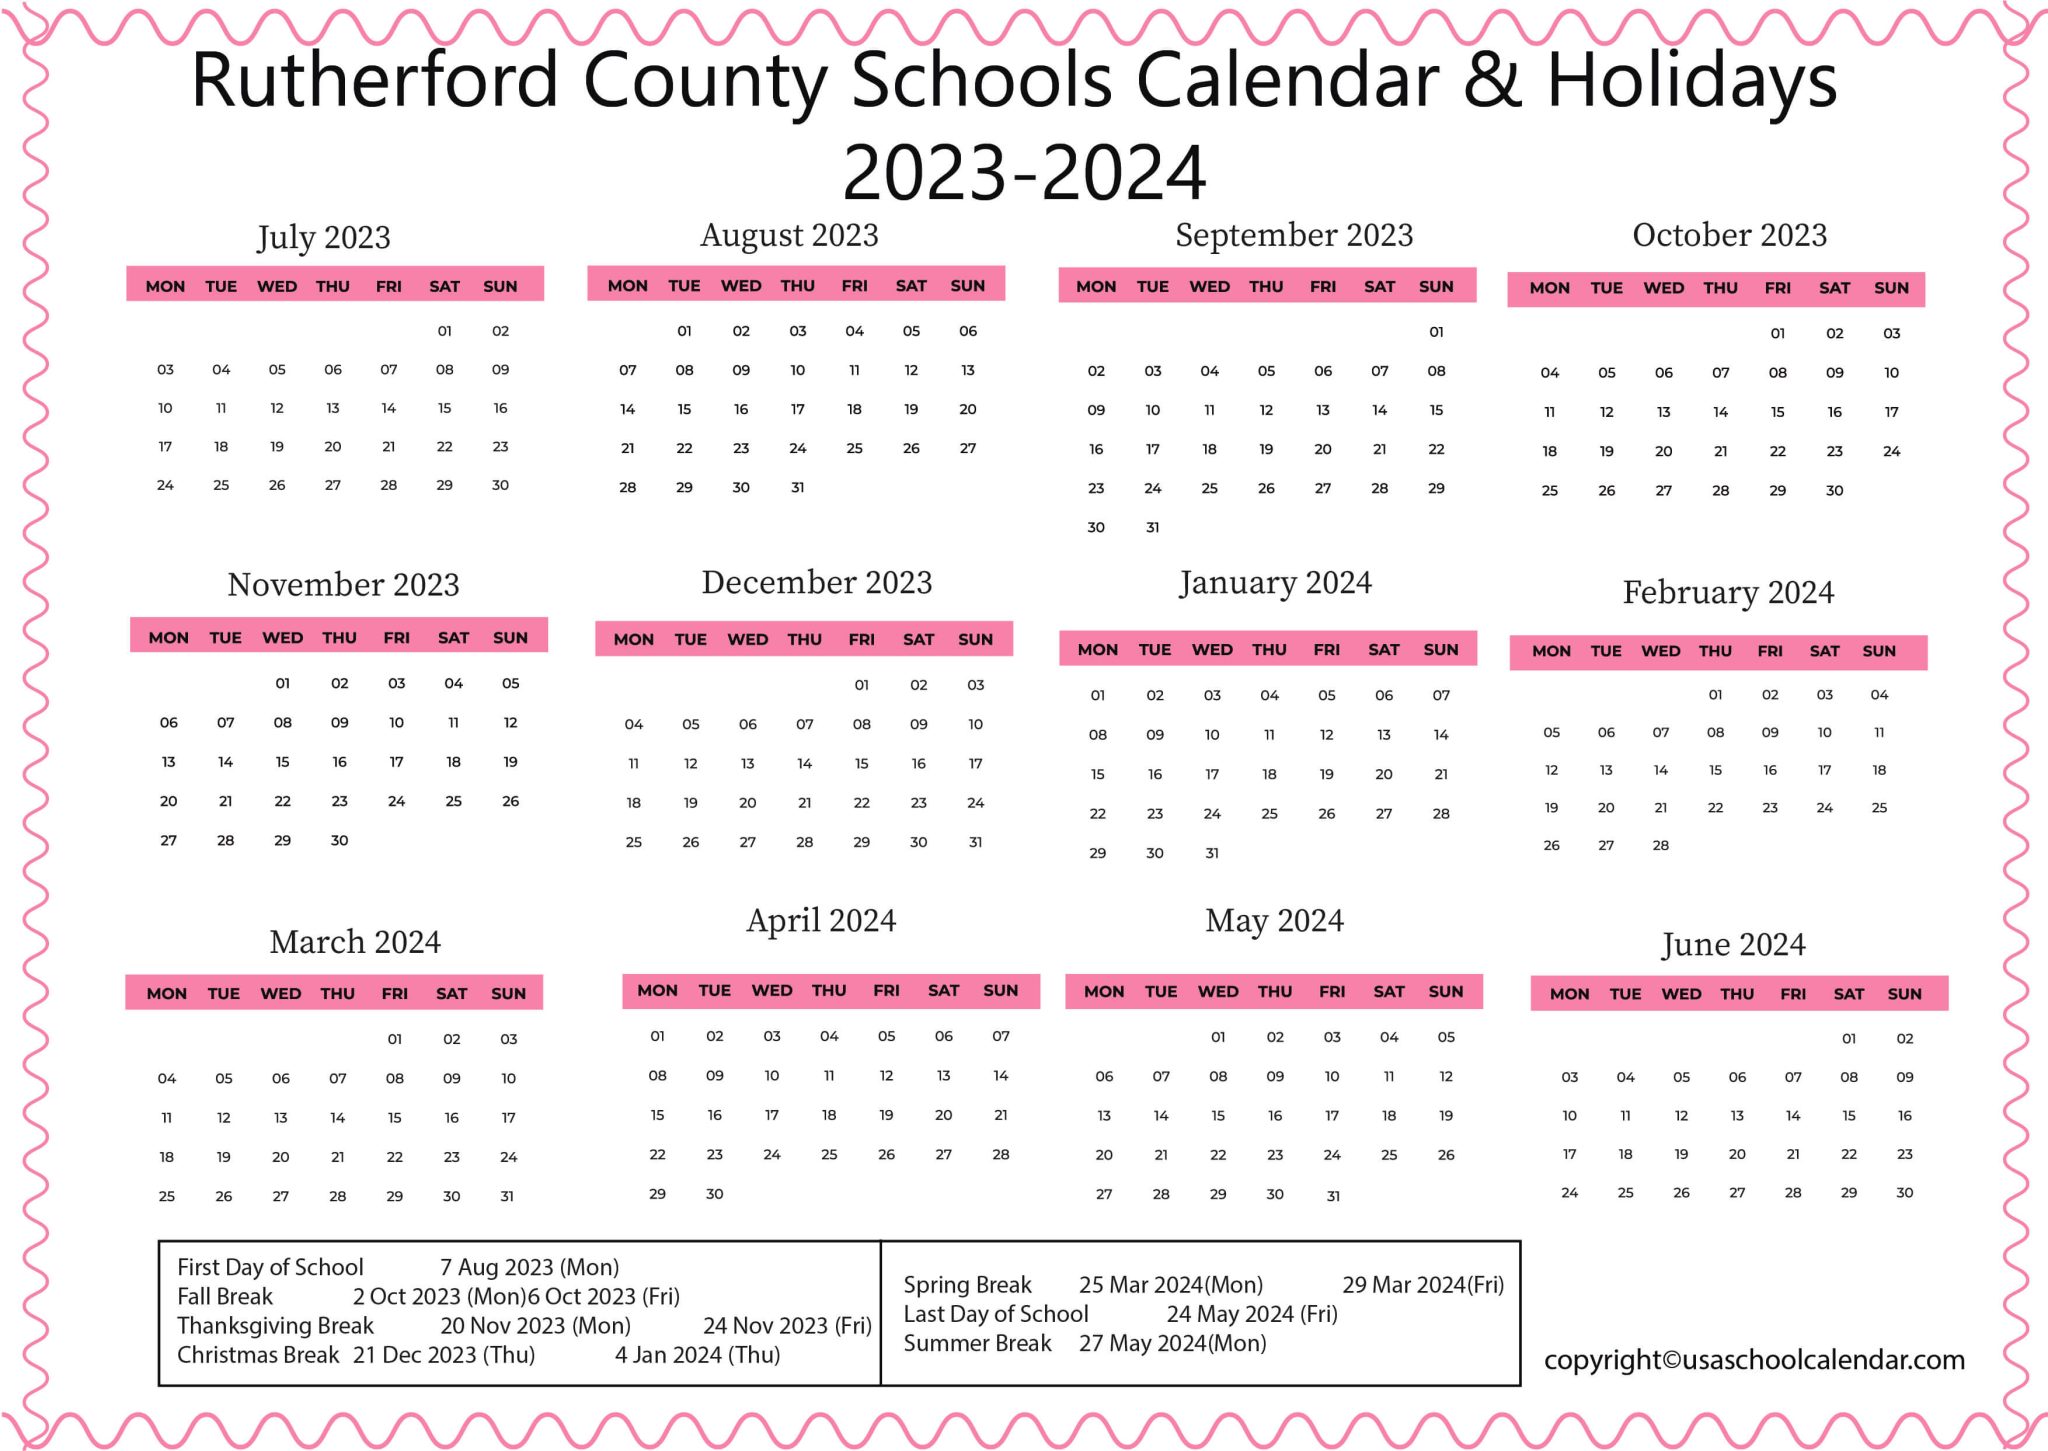 Rutherford County Schools Calendar & Holidays 2023-2024